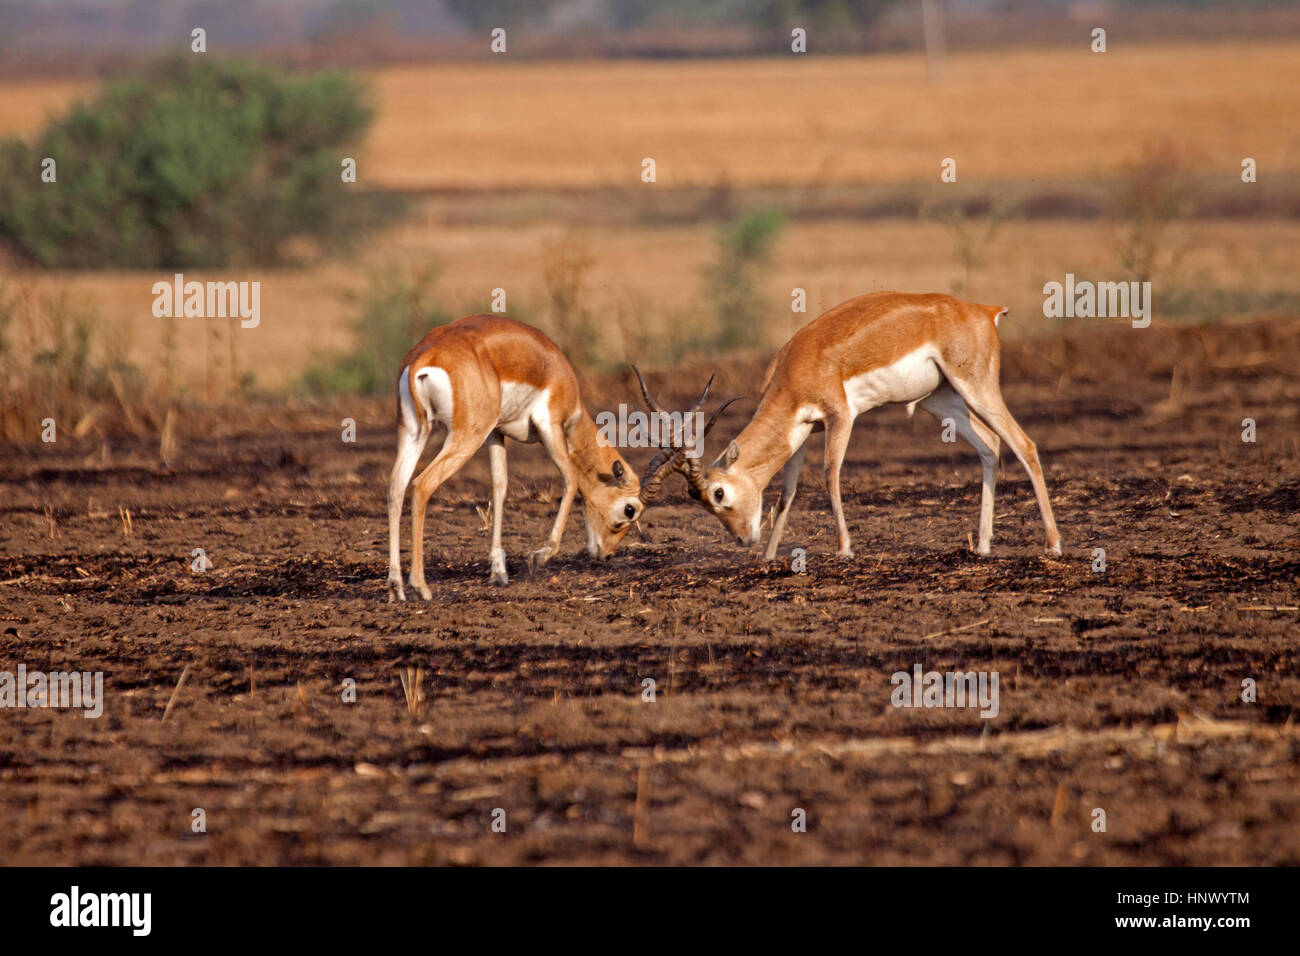 Young Black bucks sparring in stubble field in India Stock Photo